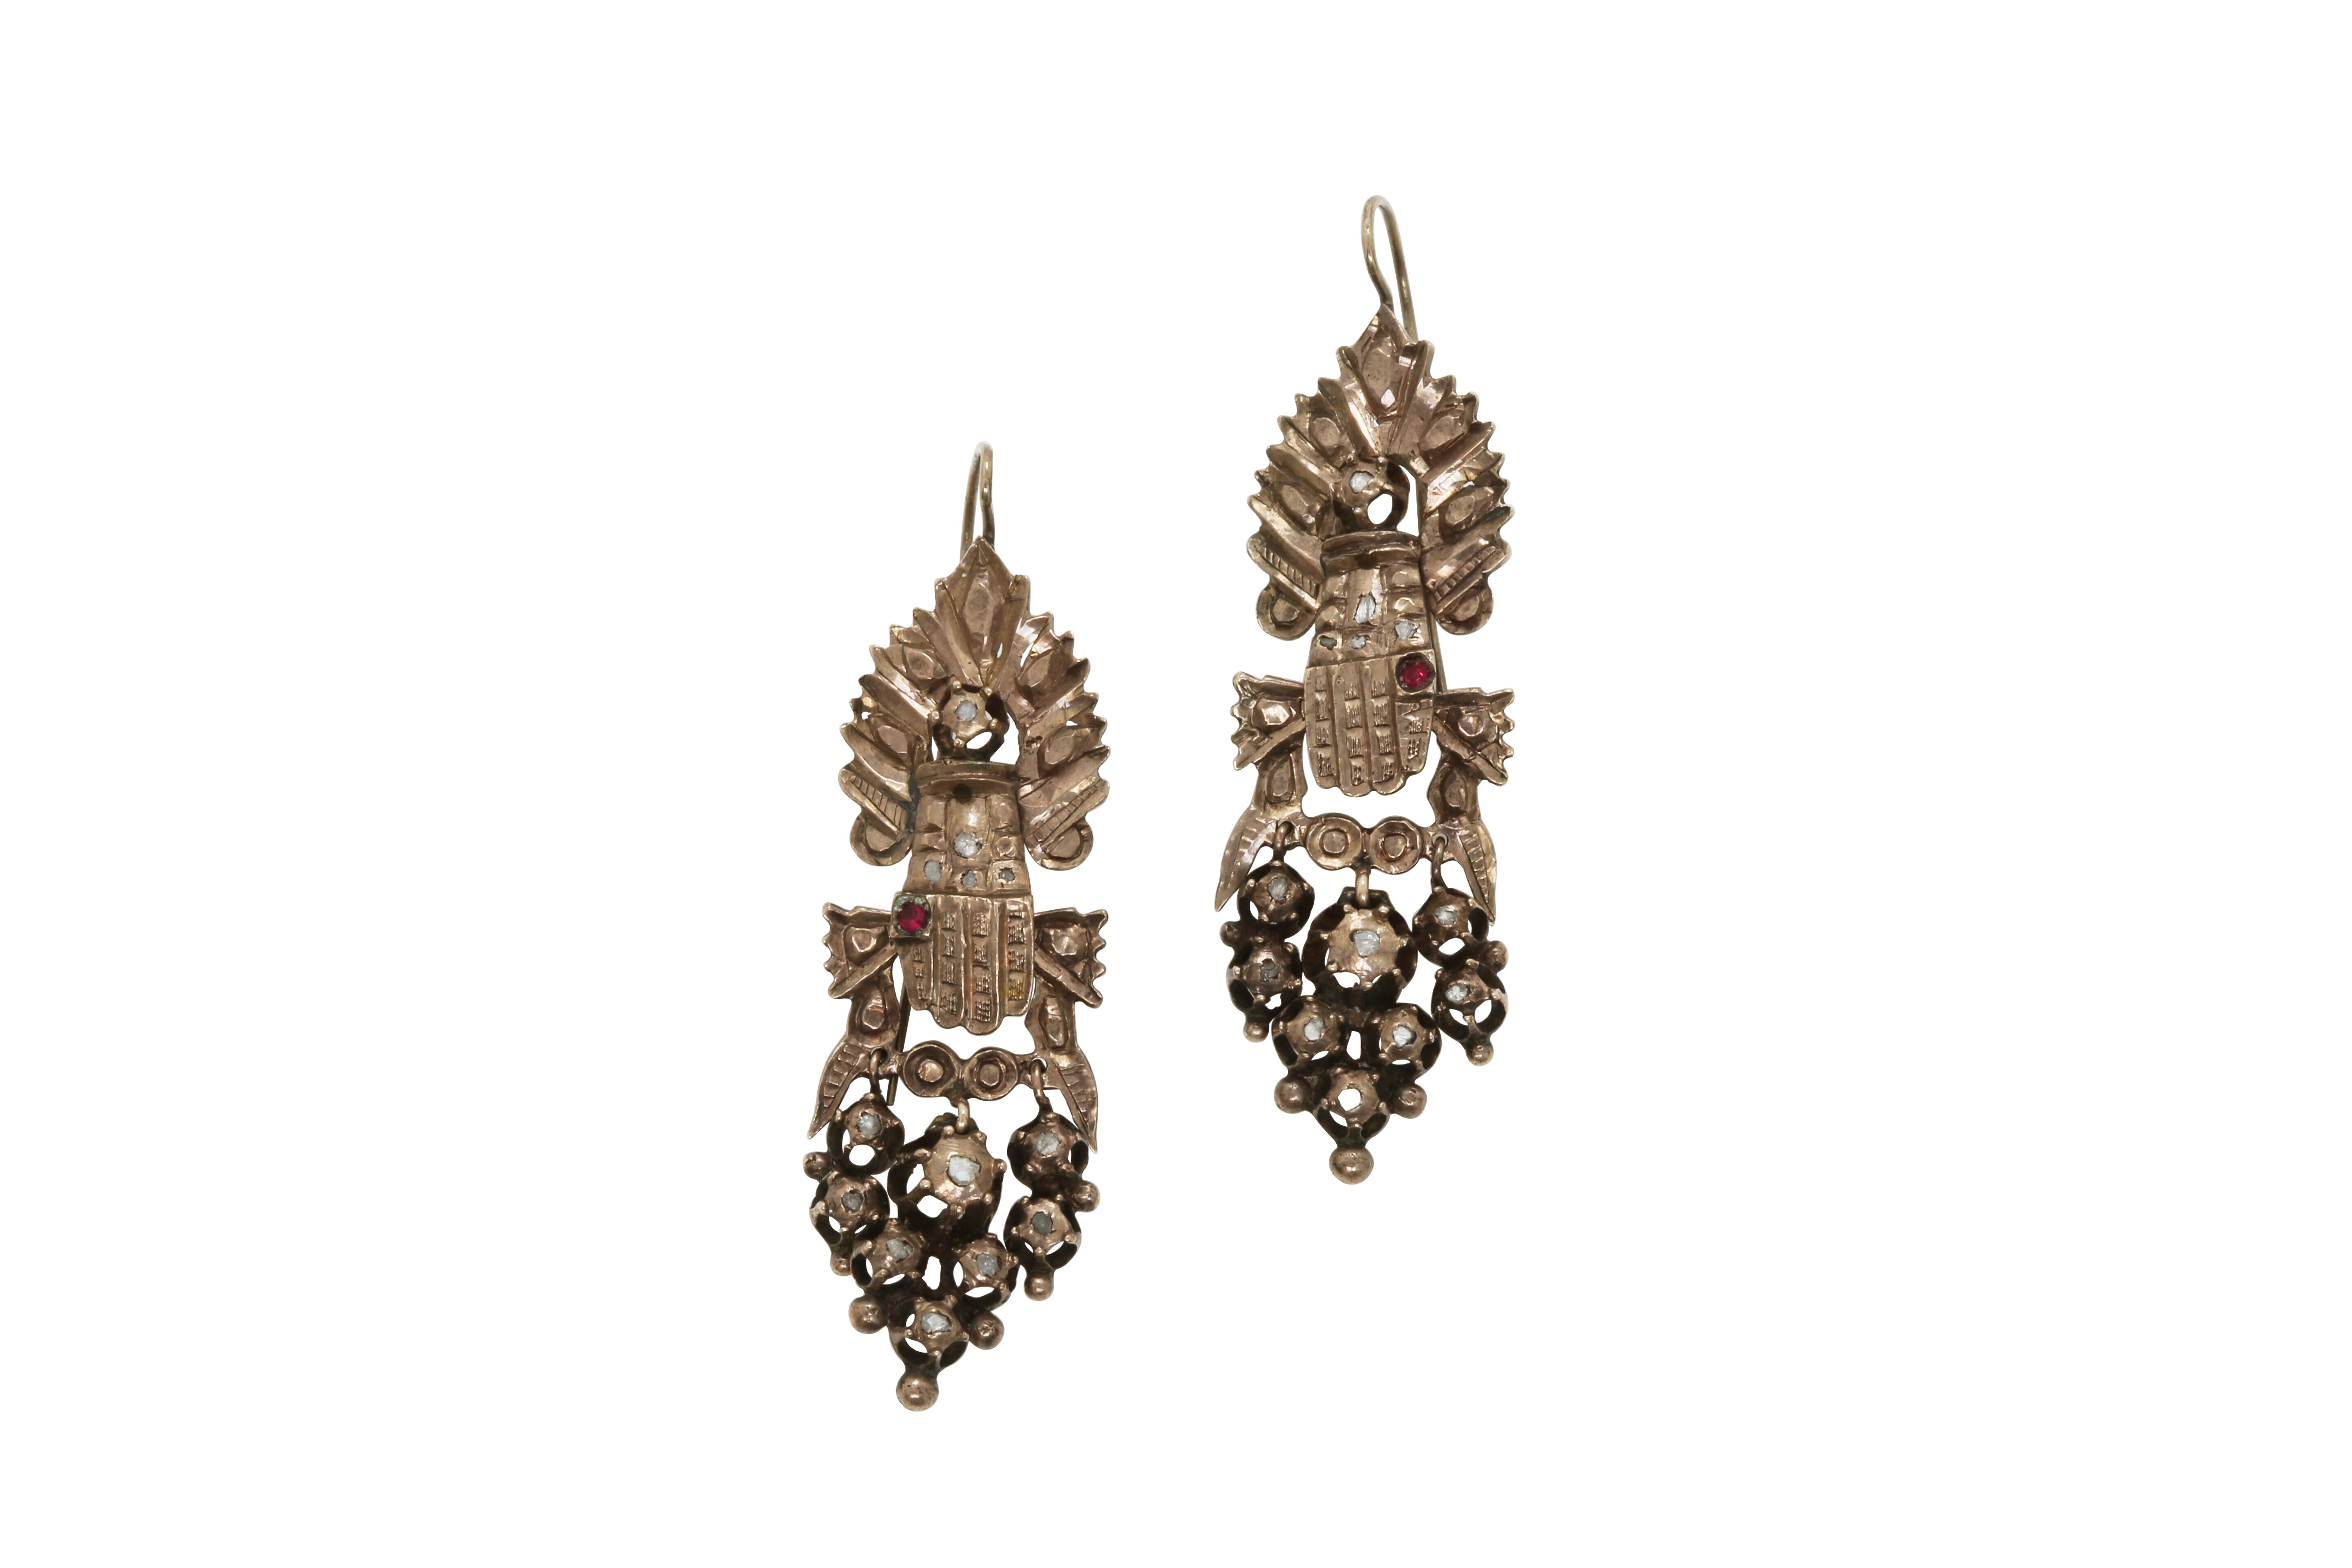 A pair of early 20th century Constantinople white gold earrings with diamonds